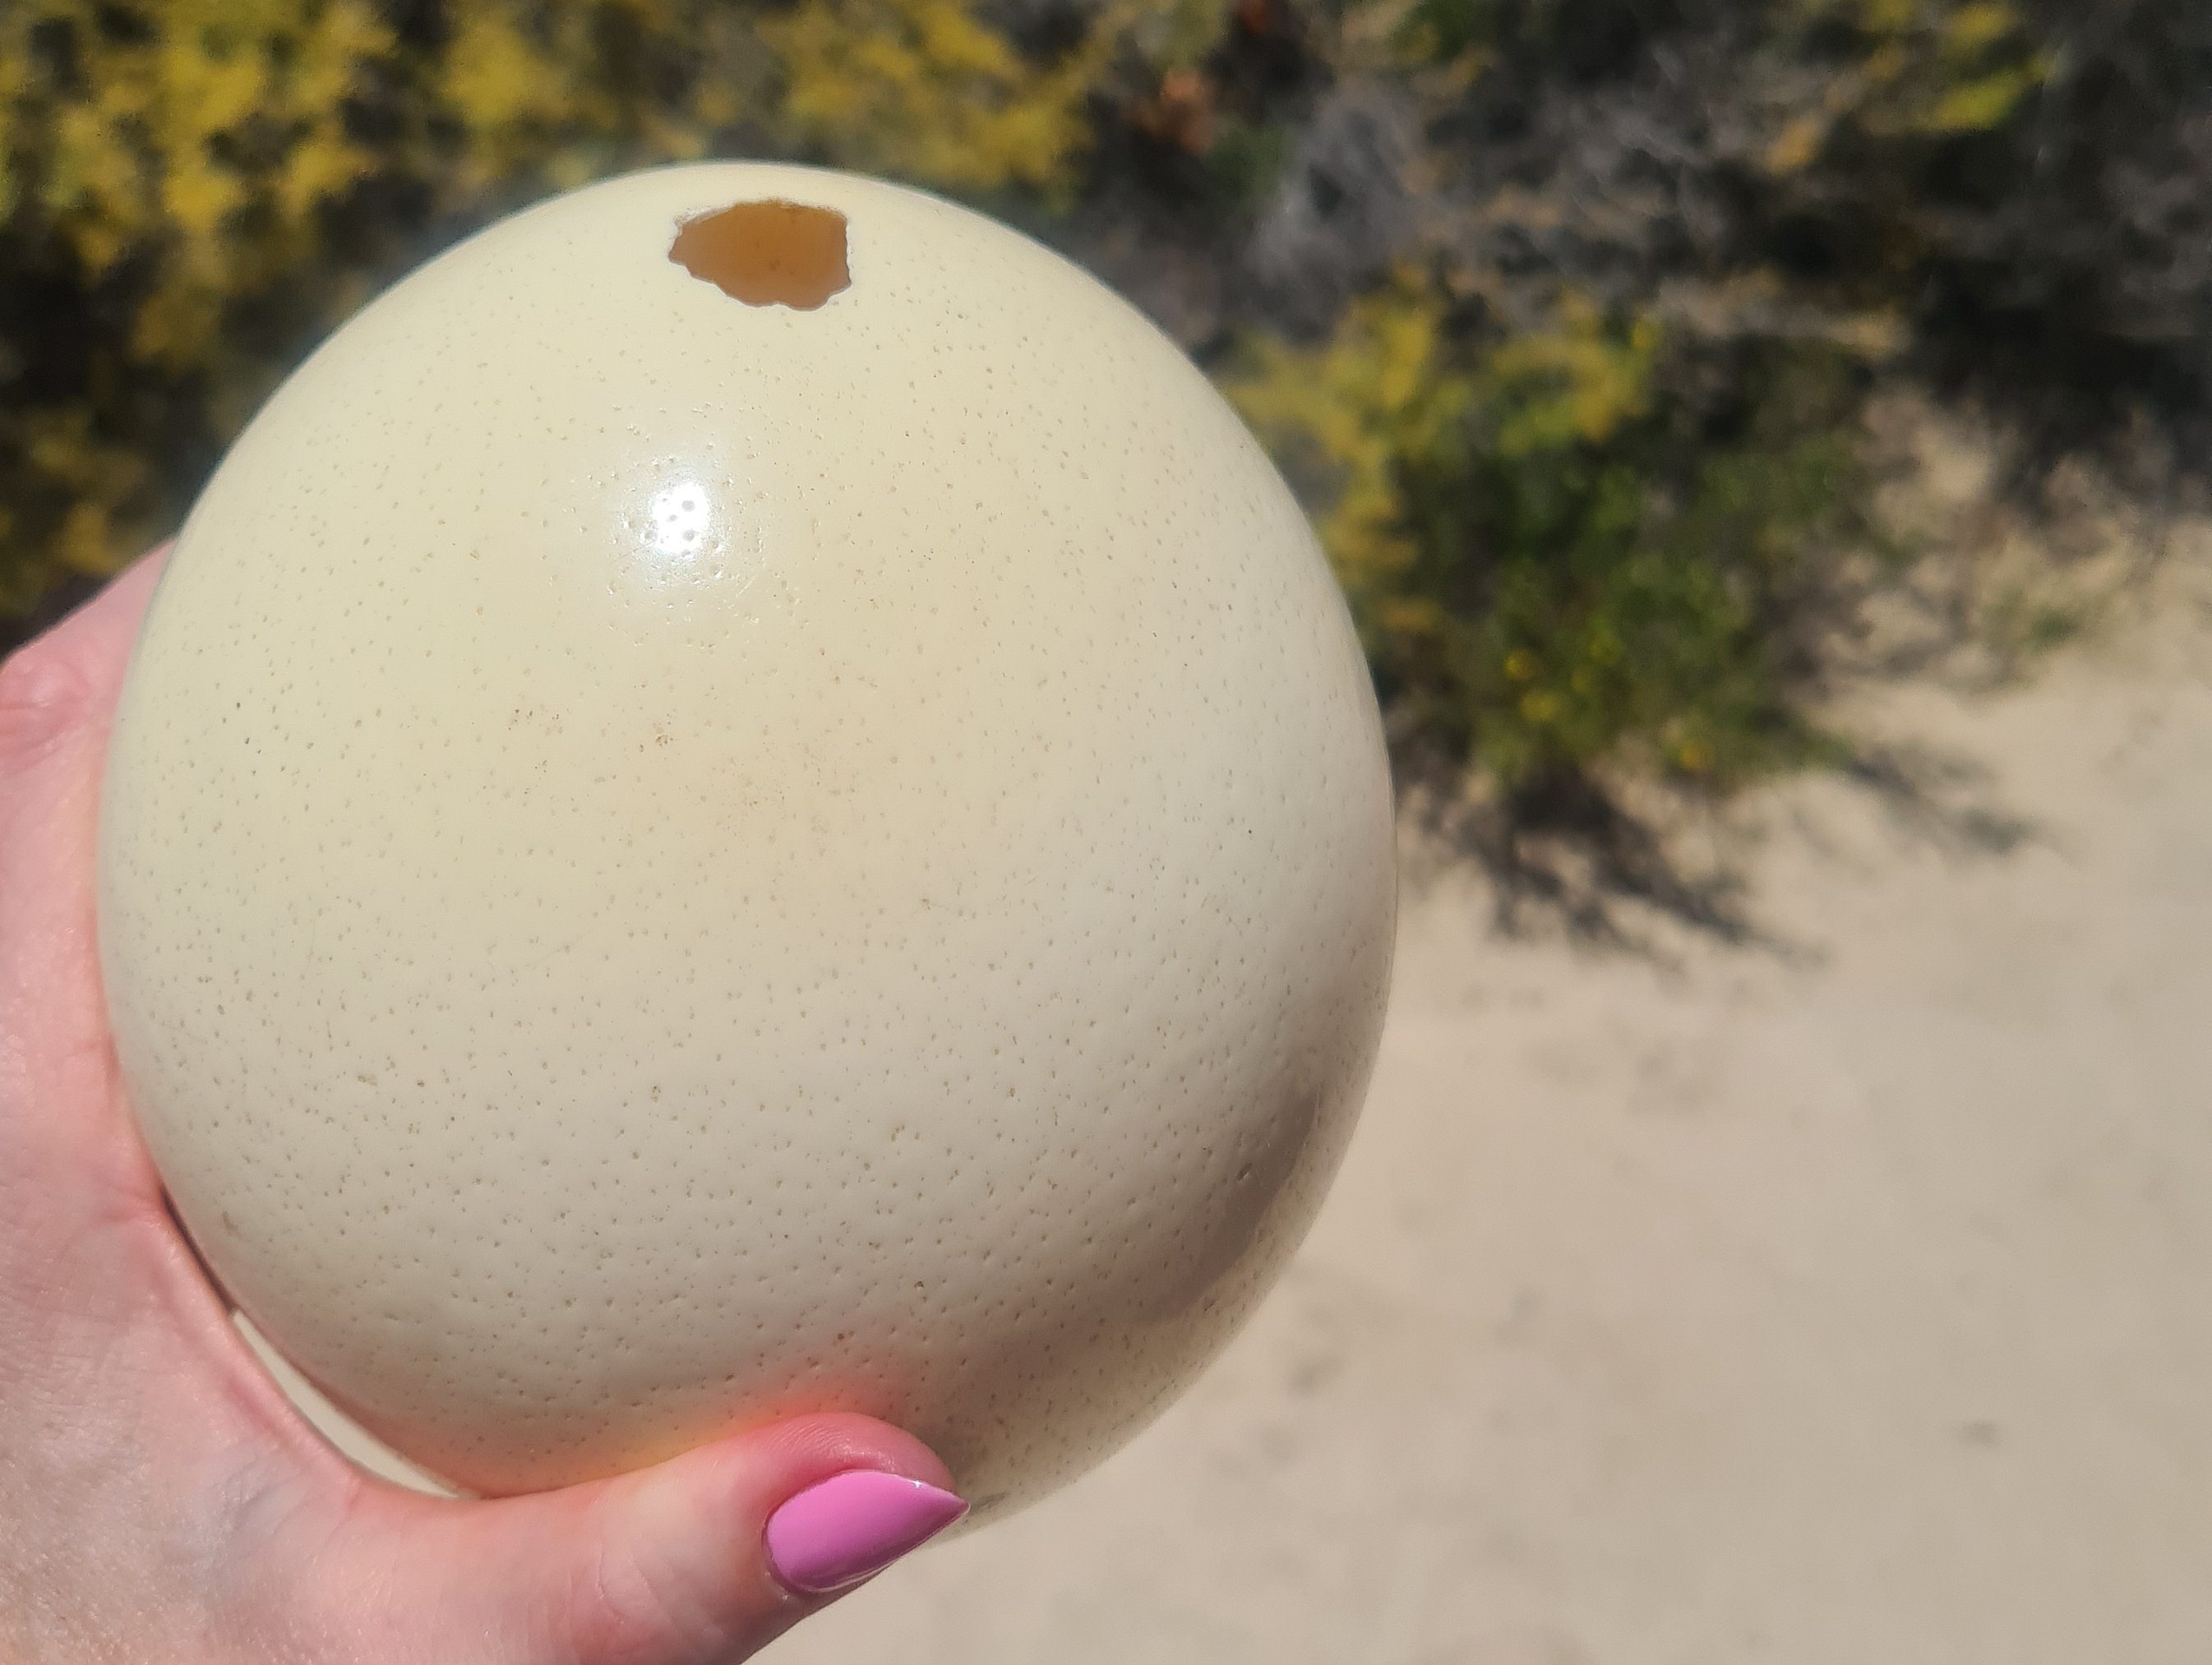 Ostrich egg used by the San people as a water carrier. Image: Carmen Clegg